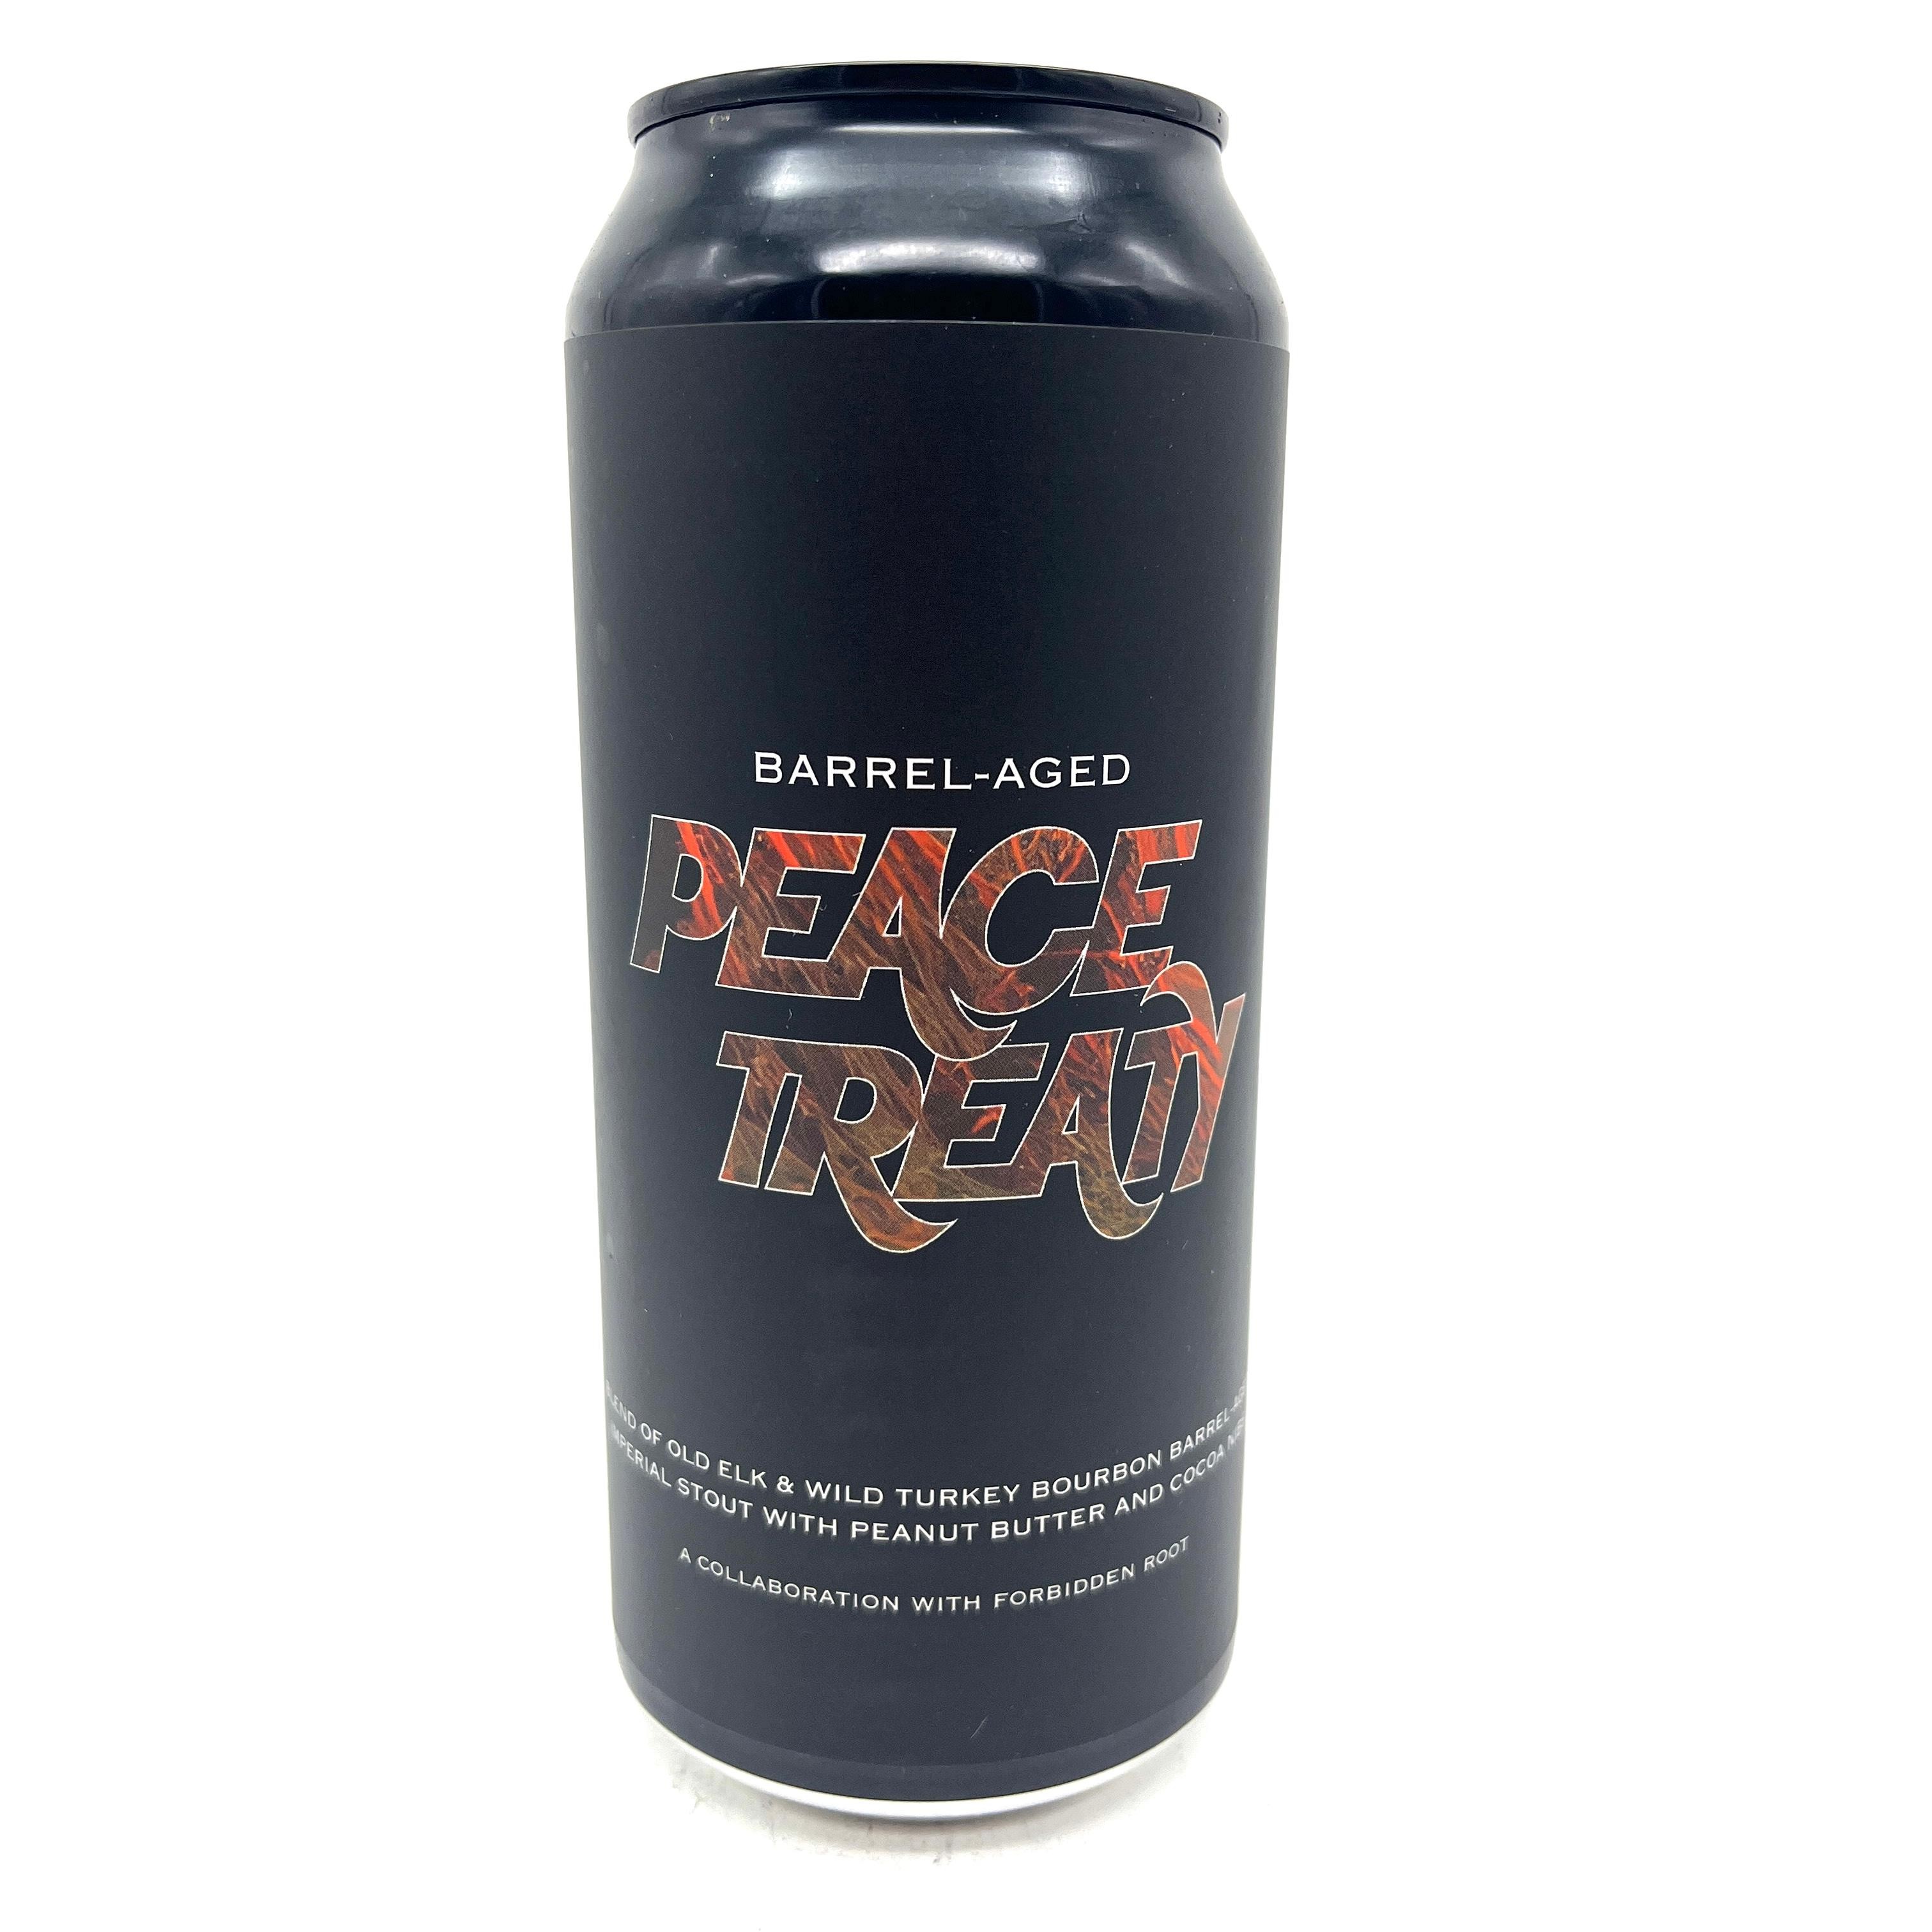 Old Irving x Forbidden Root - Barrel-Aged Peace Treaty (2024)